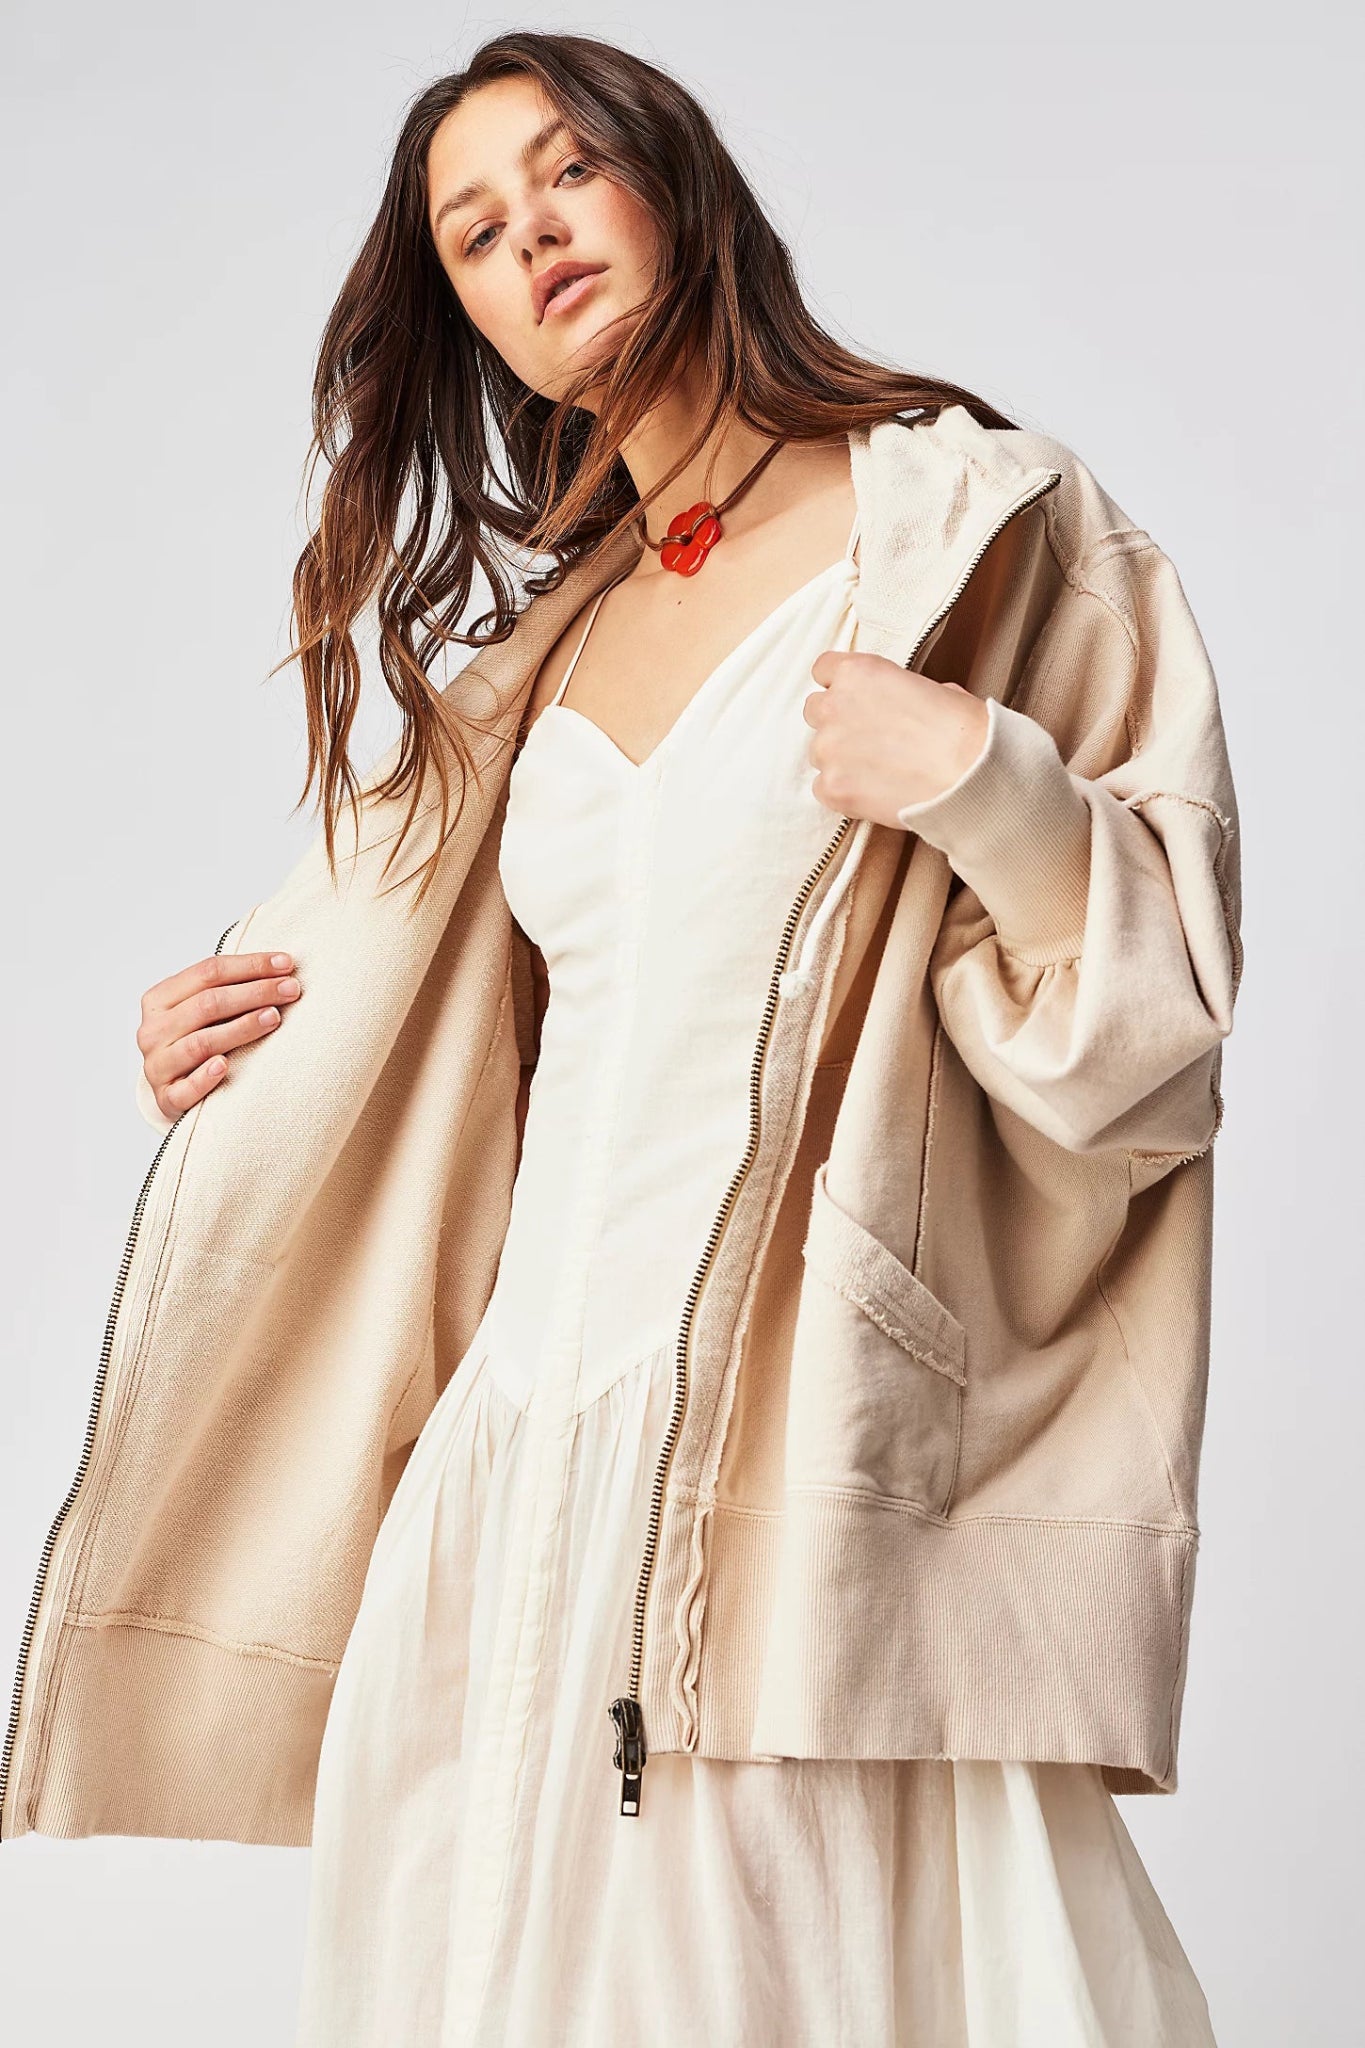 Camden Hoodie by Free People - Summer Khaki - Blue Sky Fashions & Lingerie